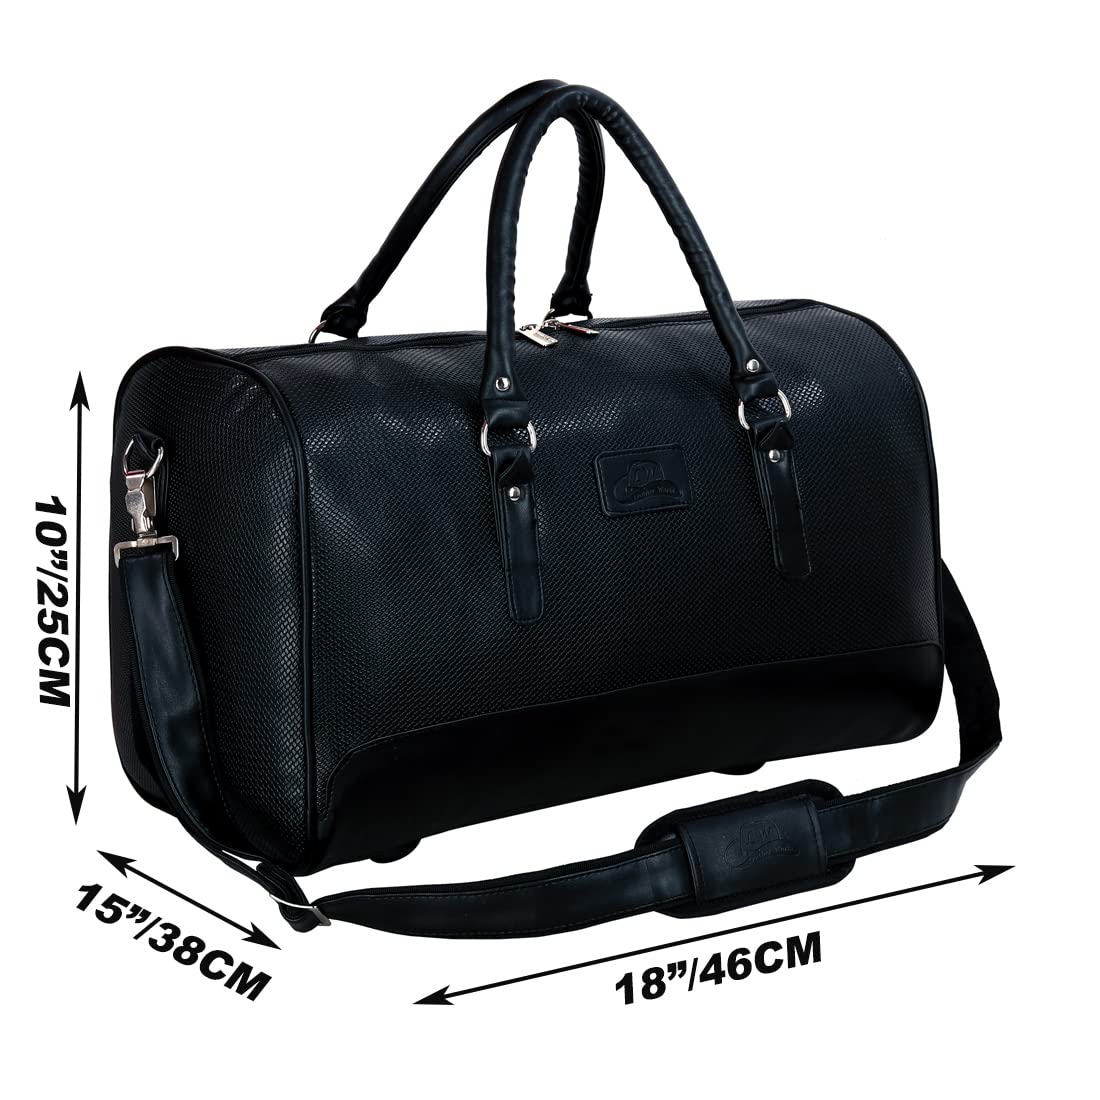 Leather World Vegan Leather Black Textured 18 Inch Travel Duffle Luggage Bag for Men Women